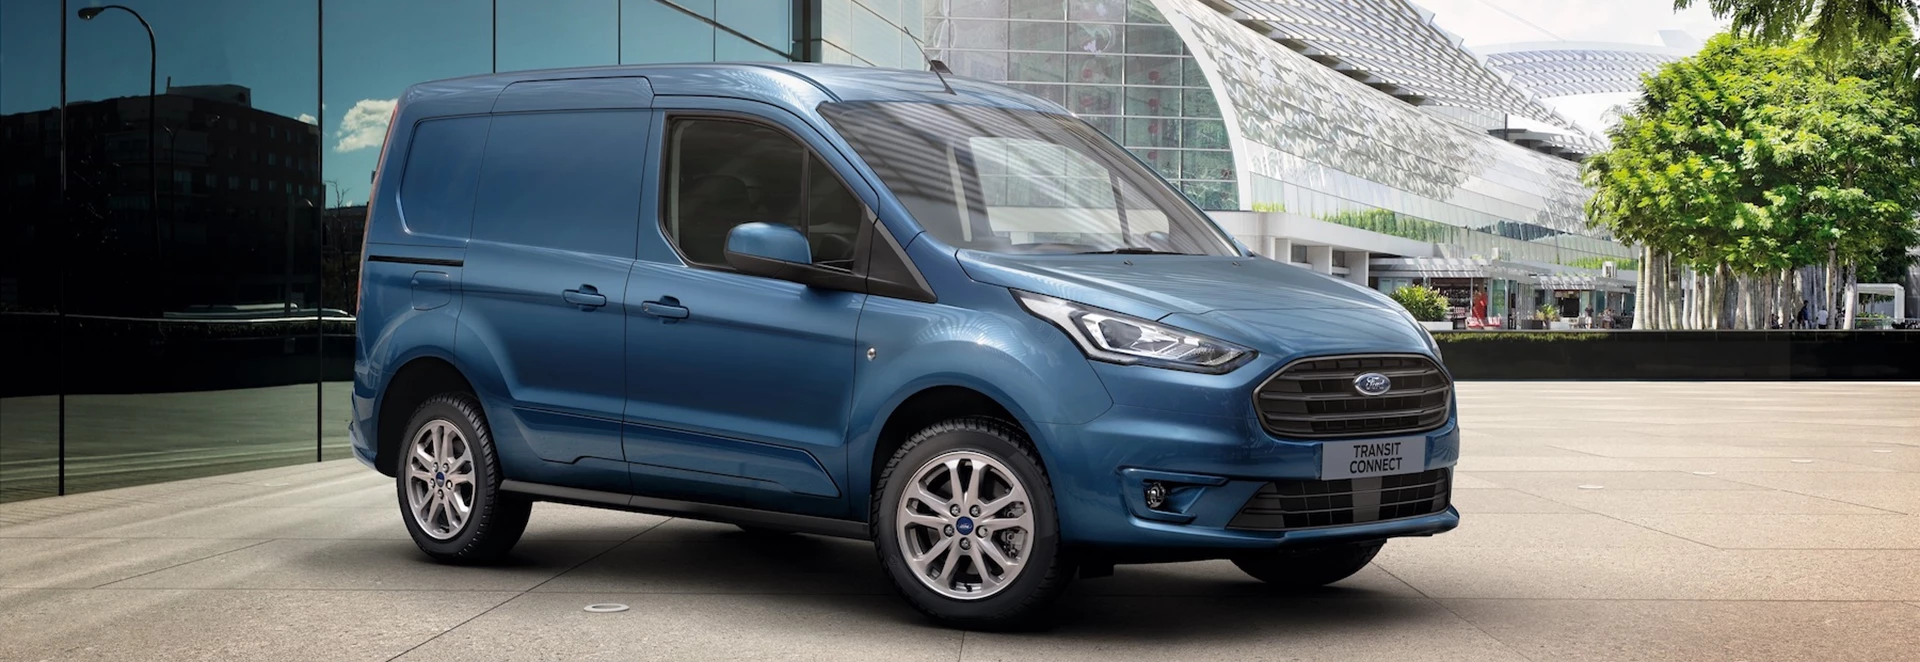 Ford updates Transit Connect with greater efficiency and practicality 